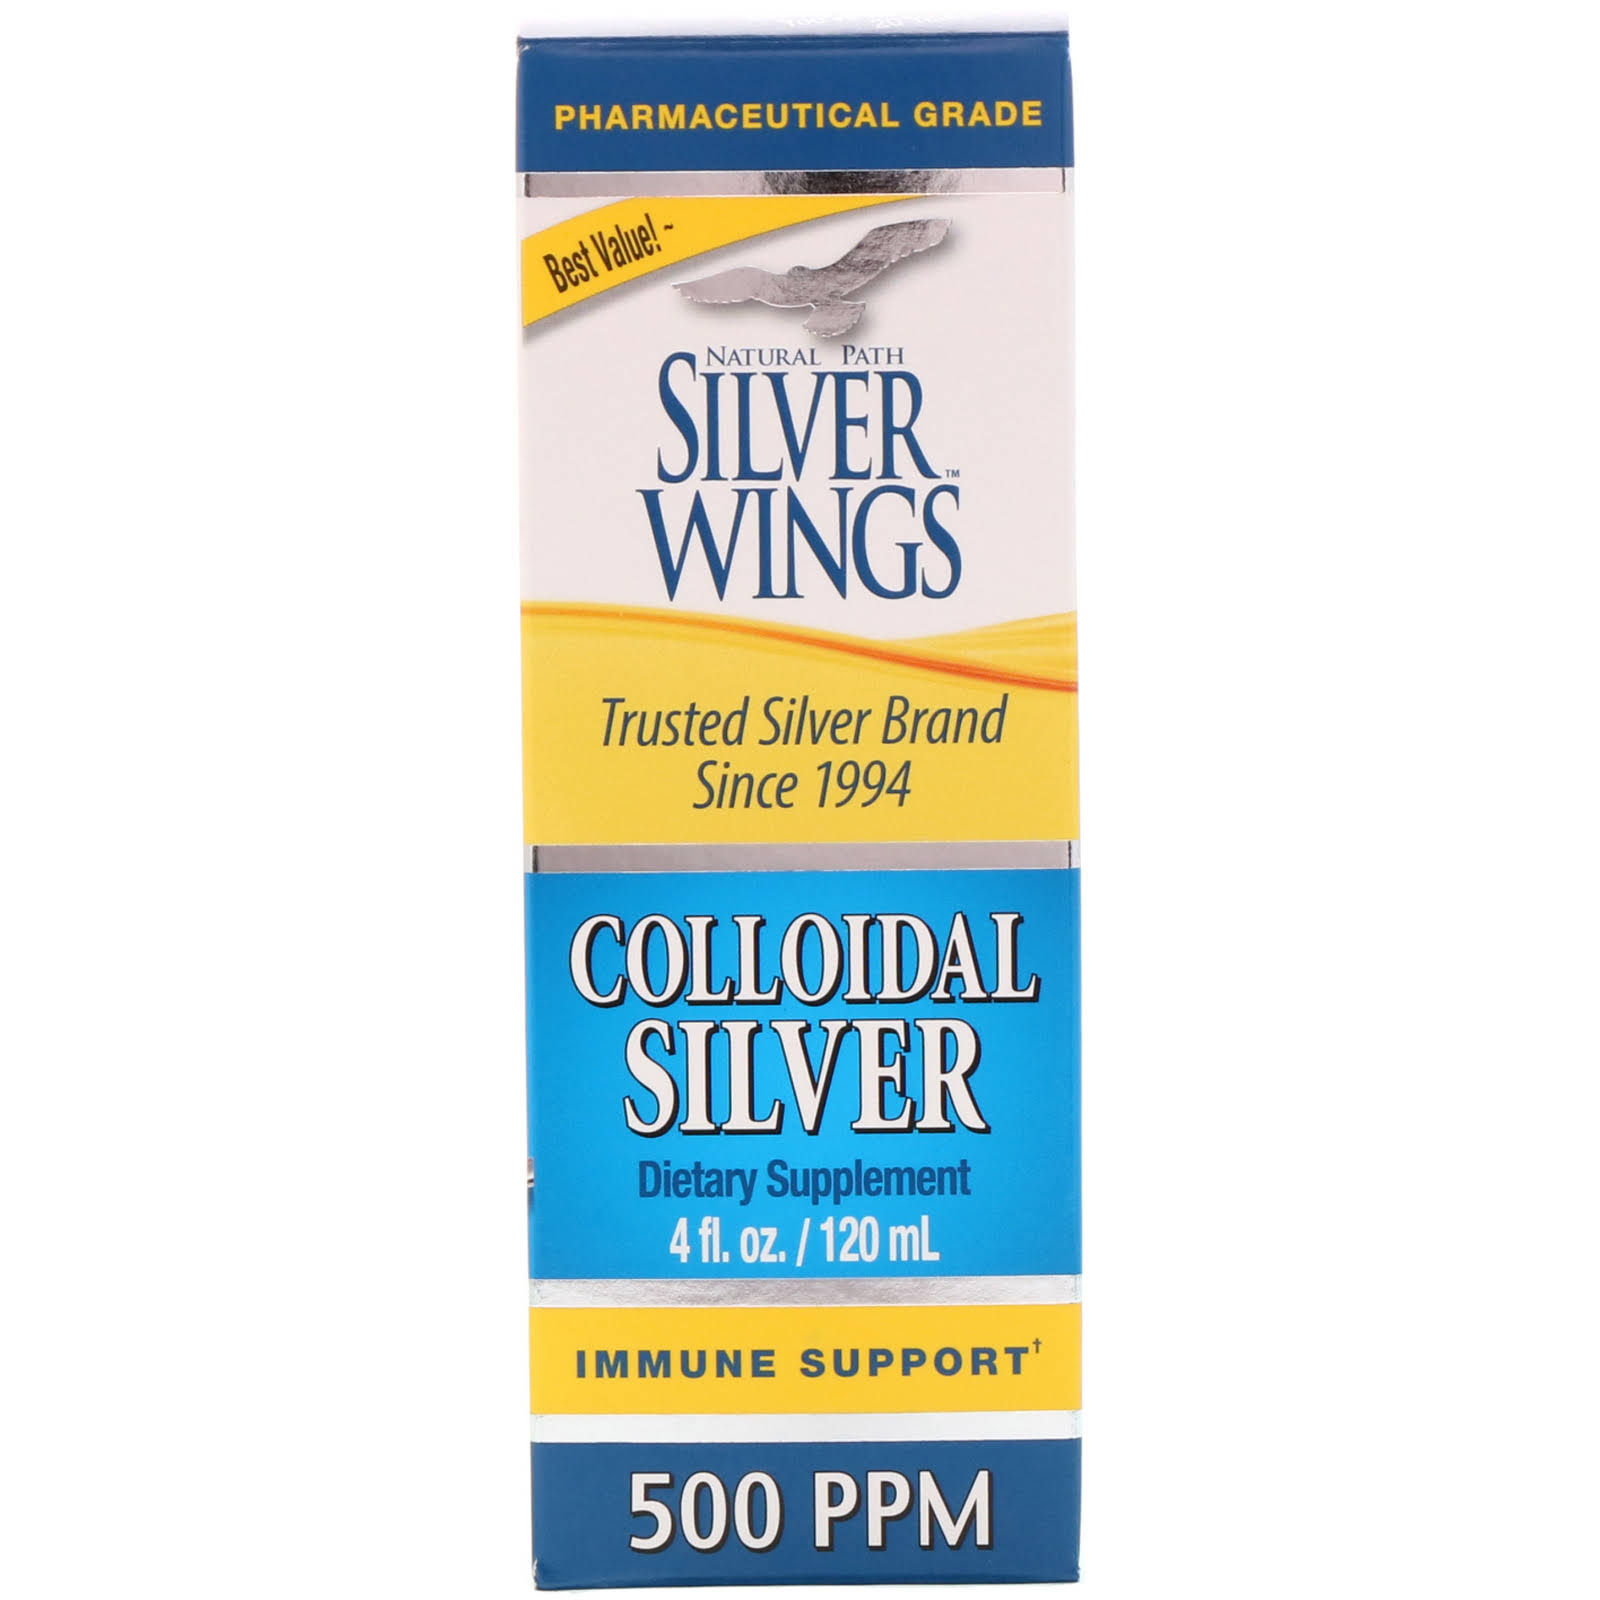 Natural Path Silver Wings Colloidal Silver - 120ml